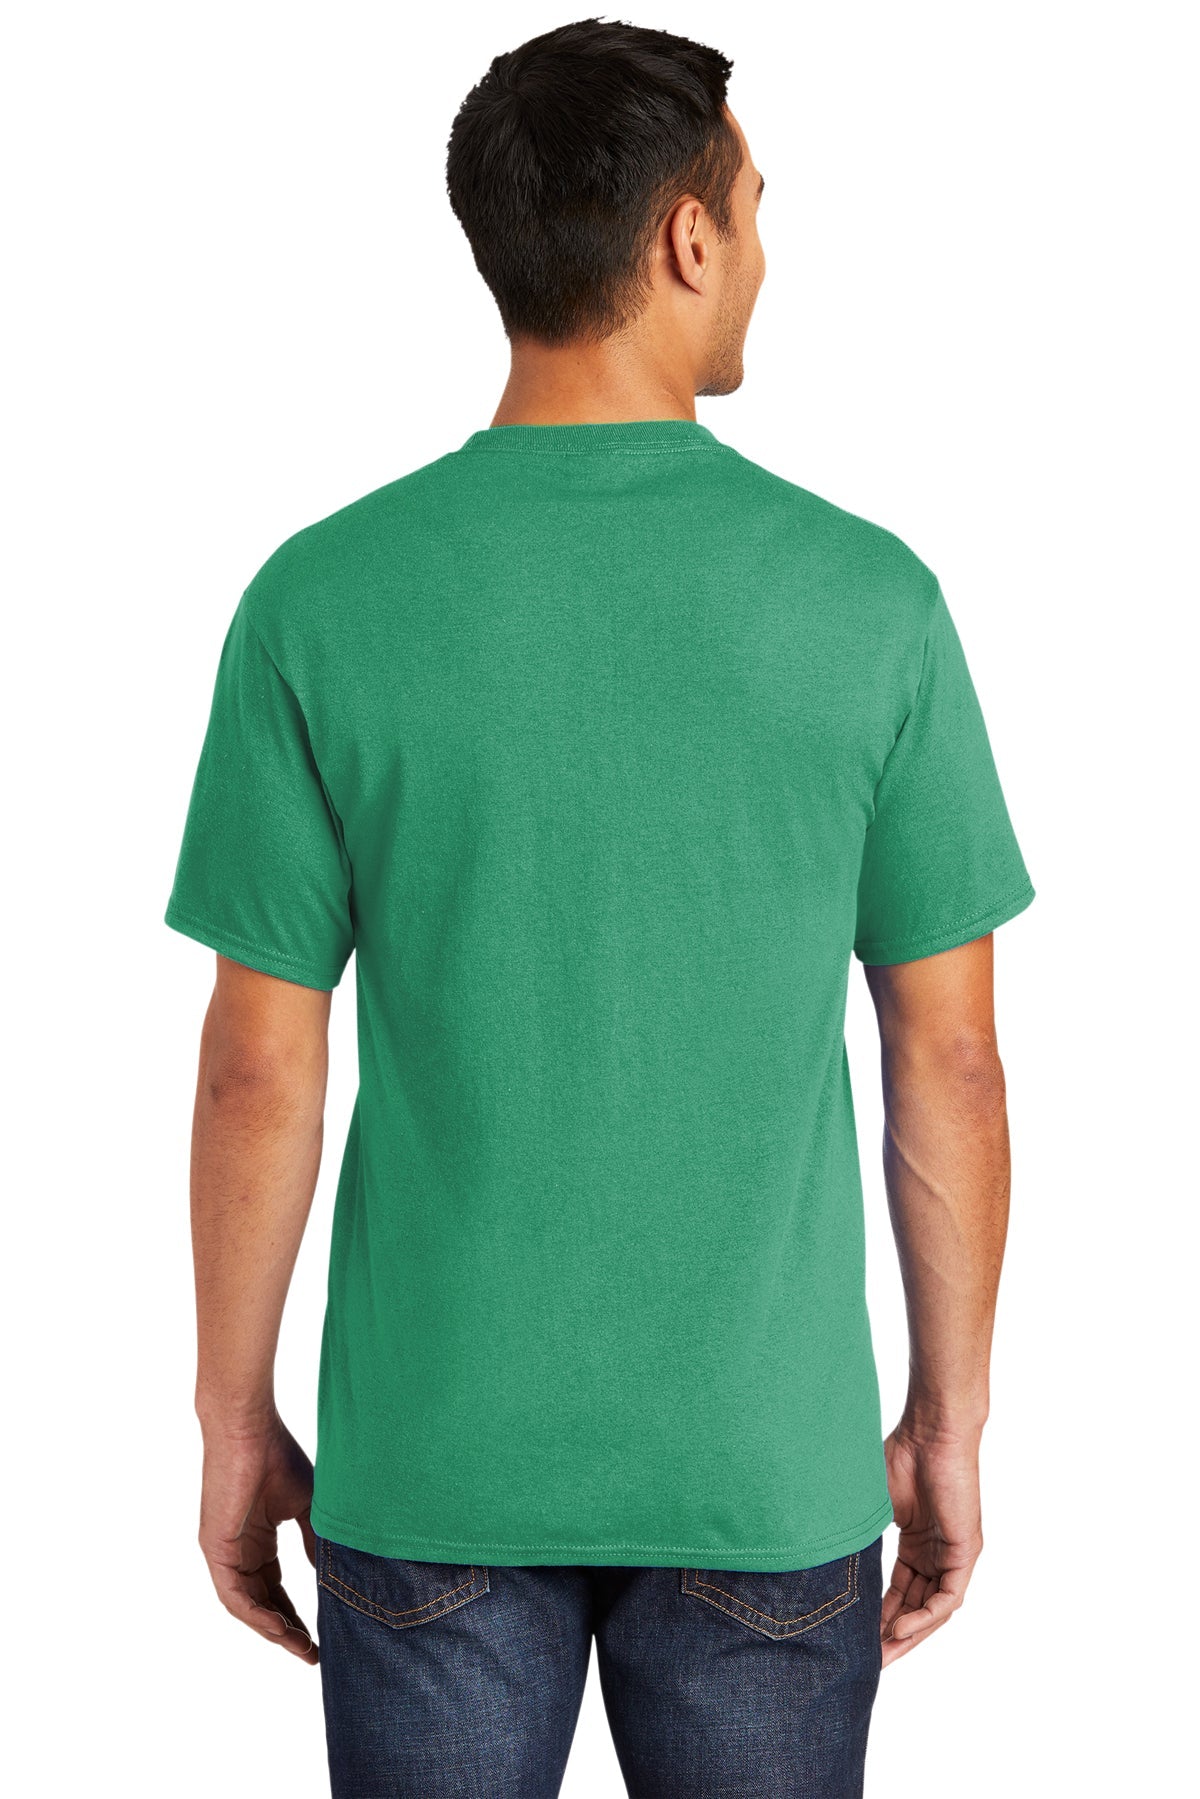 Port & Company Tall Core Blend Branded Tee's, Kelly